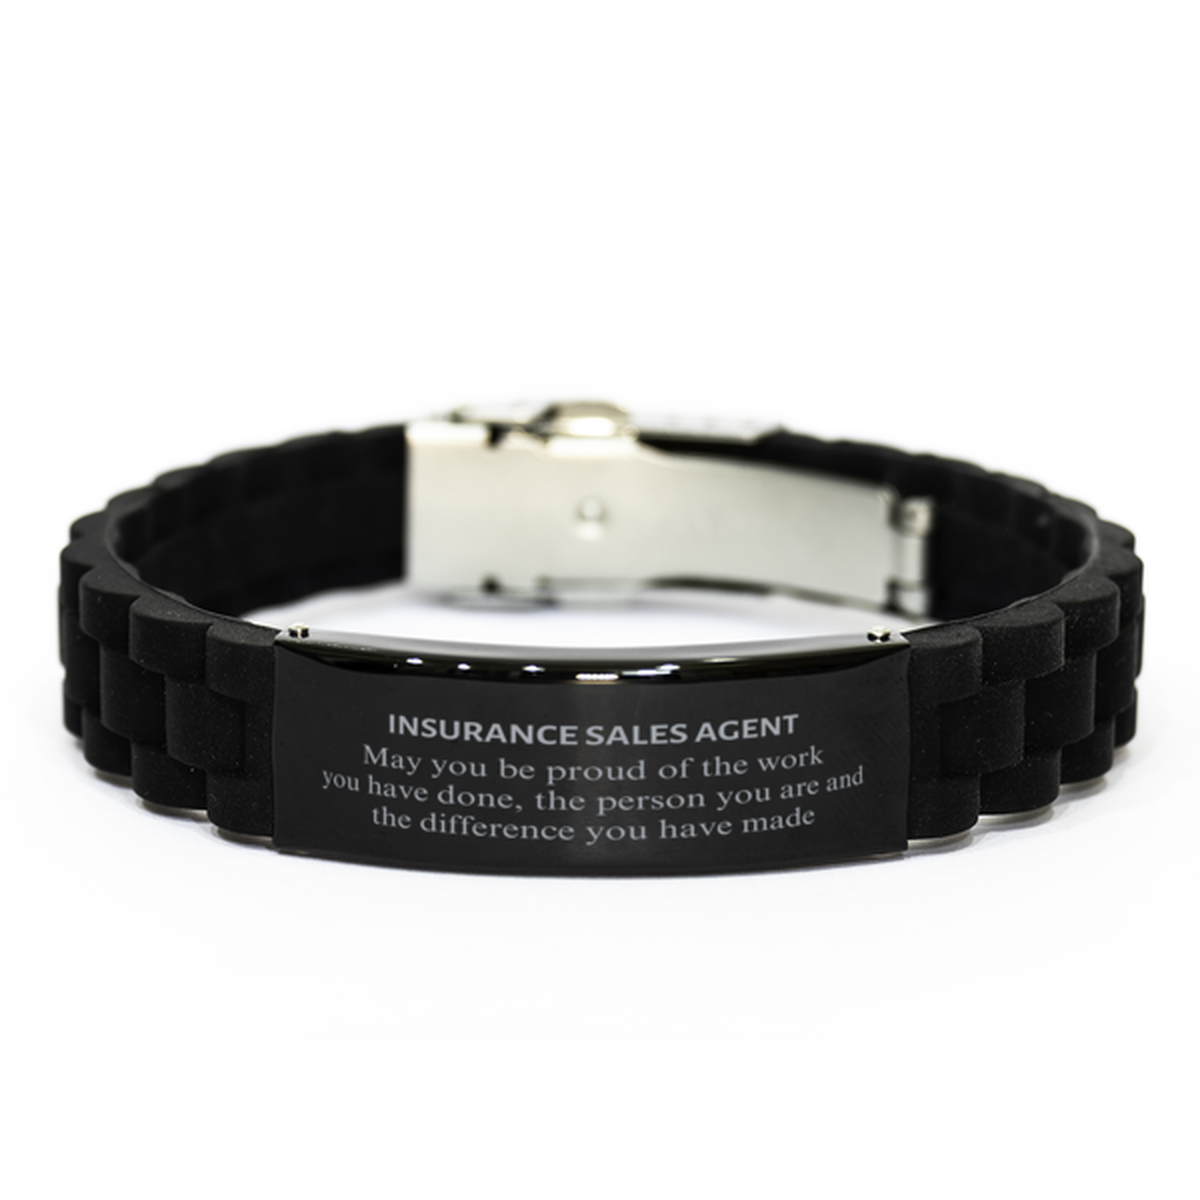 Insurance Sales Agent May you be proud of the work you have done, Retirement Insurance Sales Agent Black Glidelock Clasp Bracelet for Colleague Appreciation Gifts Amazing for Insurance Sales Agent